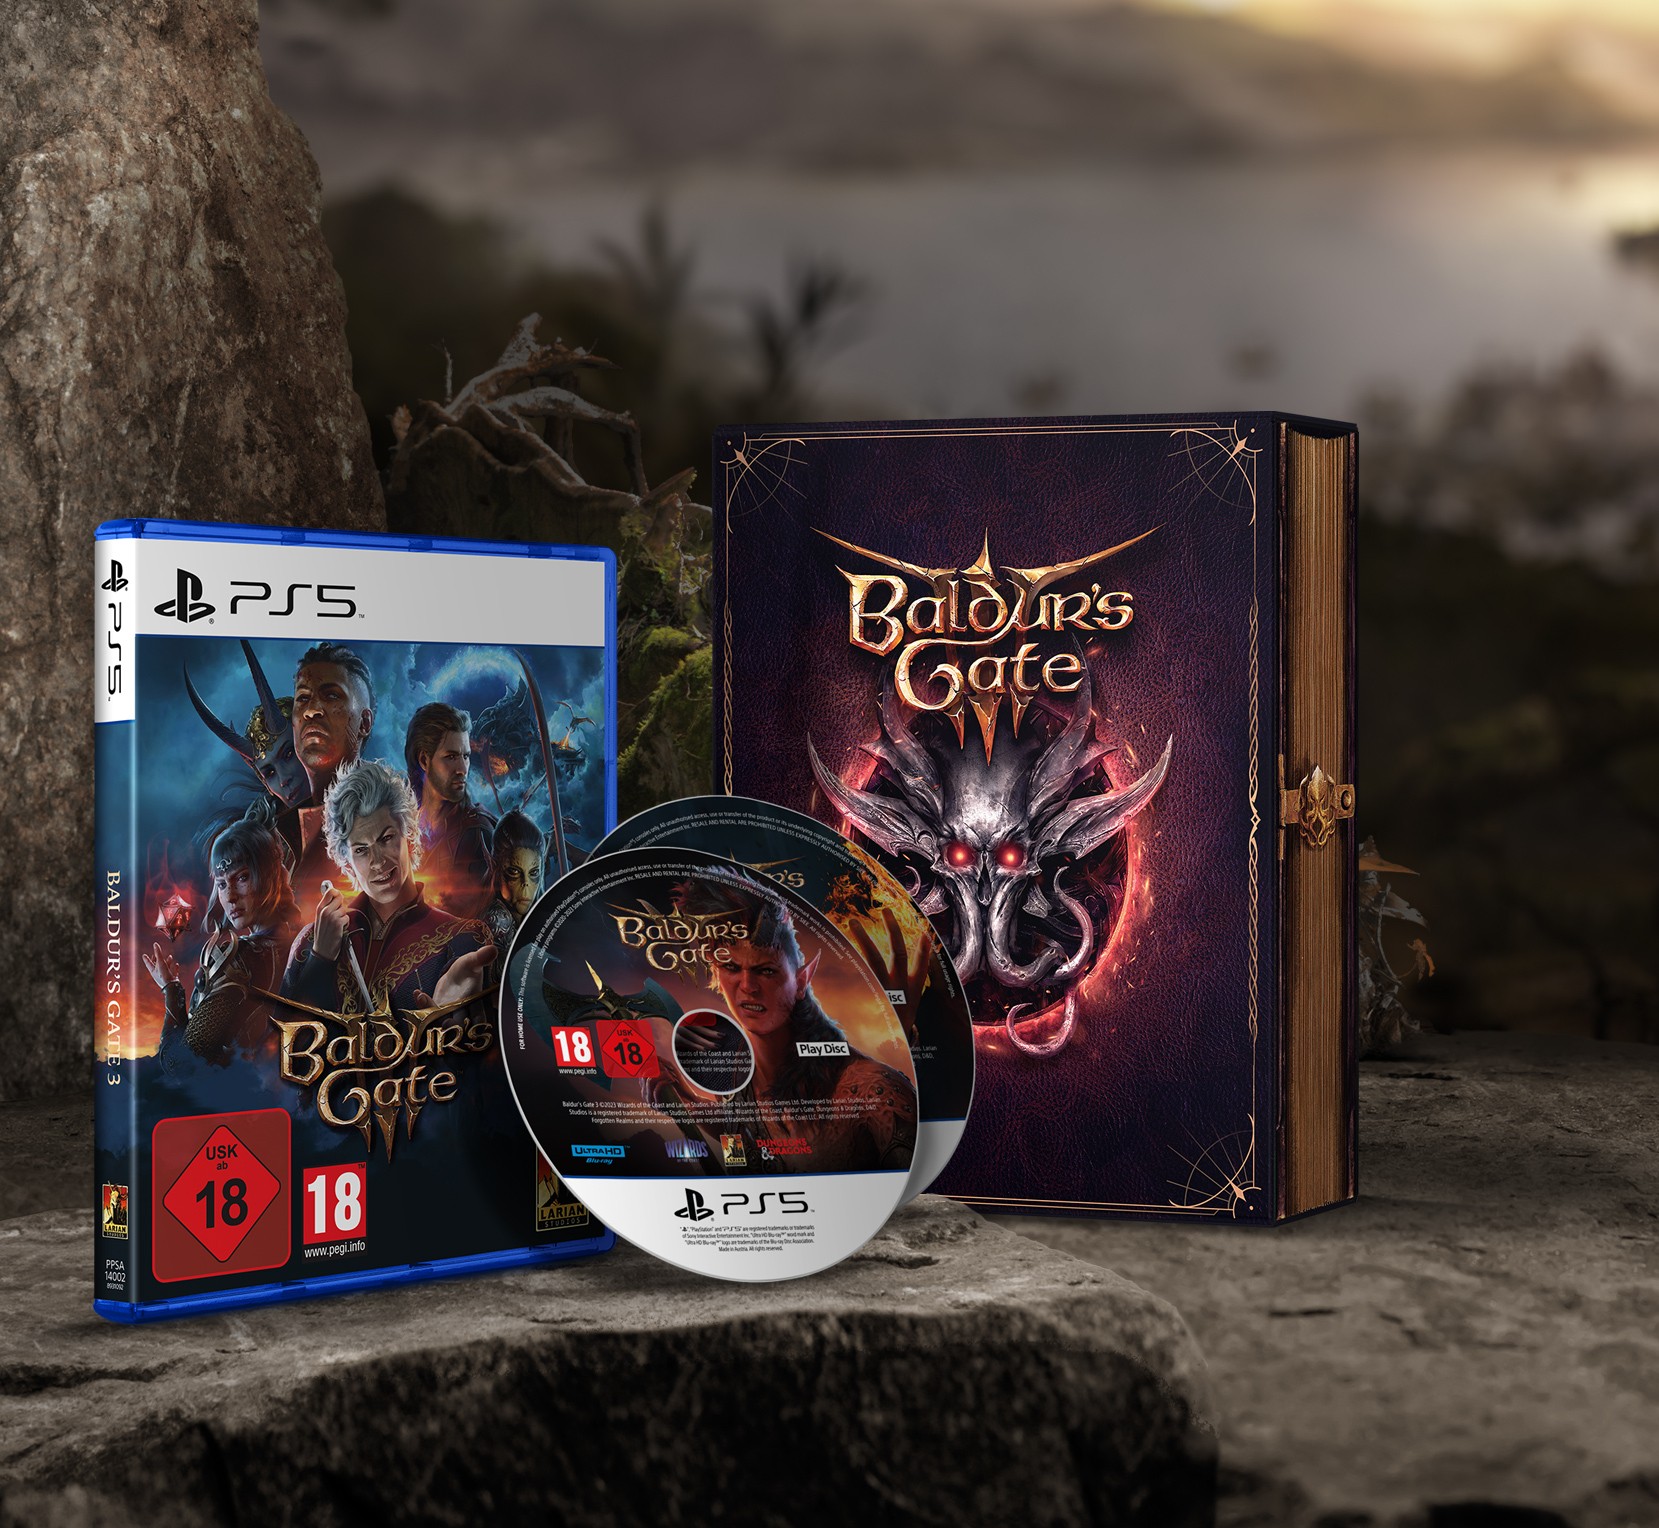 Baldur's Gate 3 physical copies exist for PS5 but they're hard to